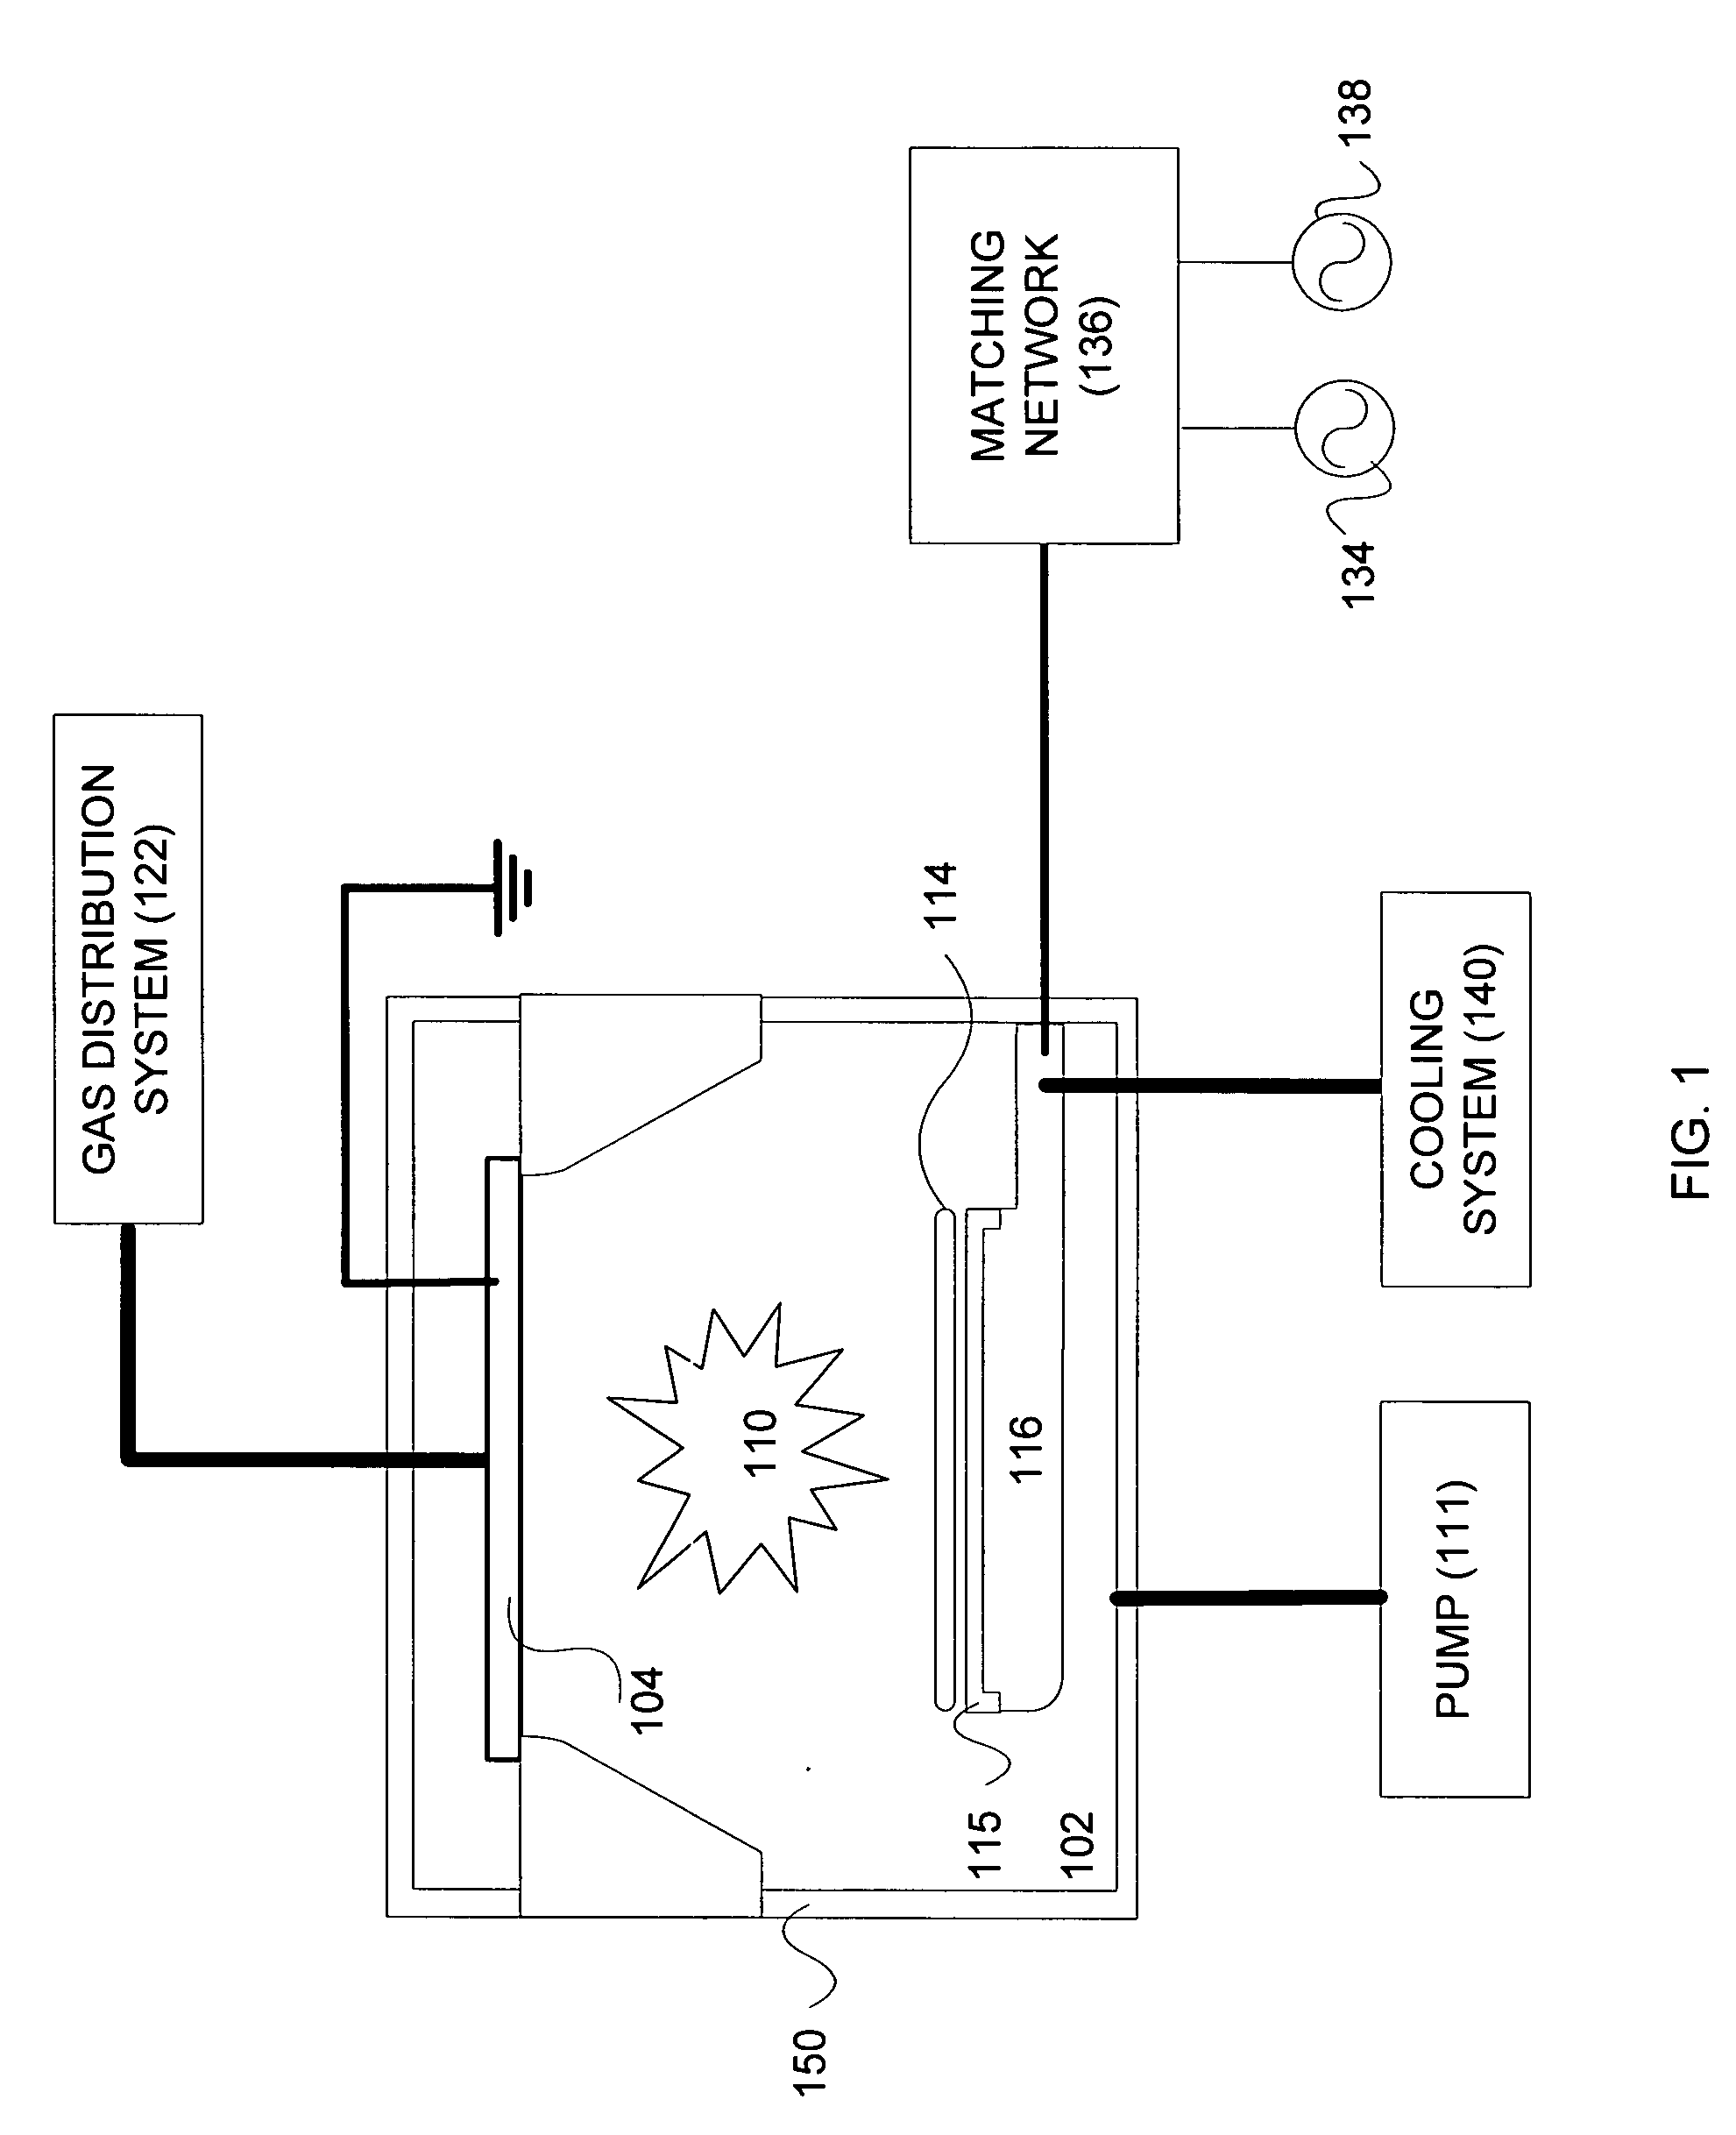 Methods and apparatus for monitoring a process in a plasma processing system by measuring impedance